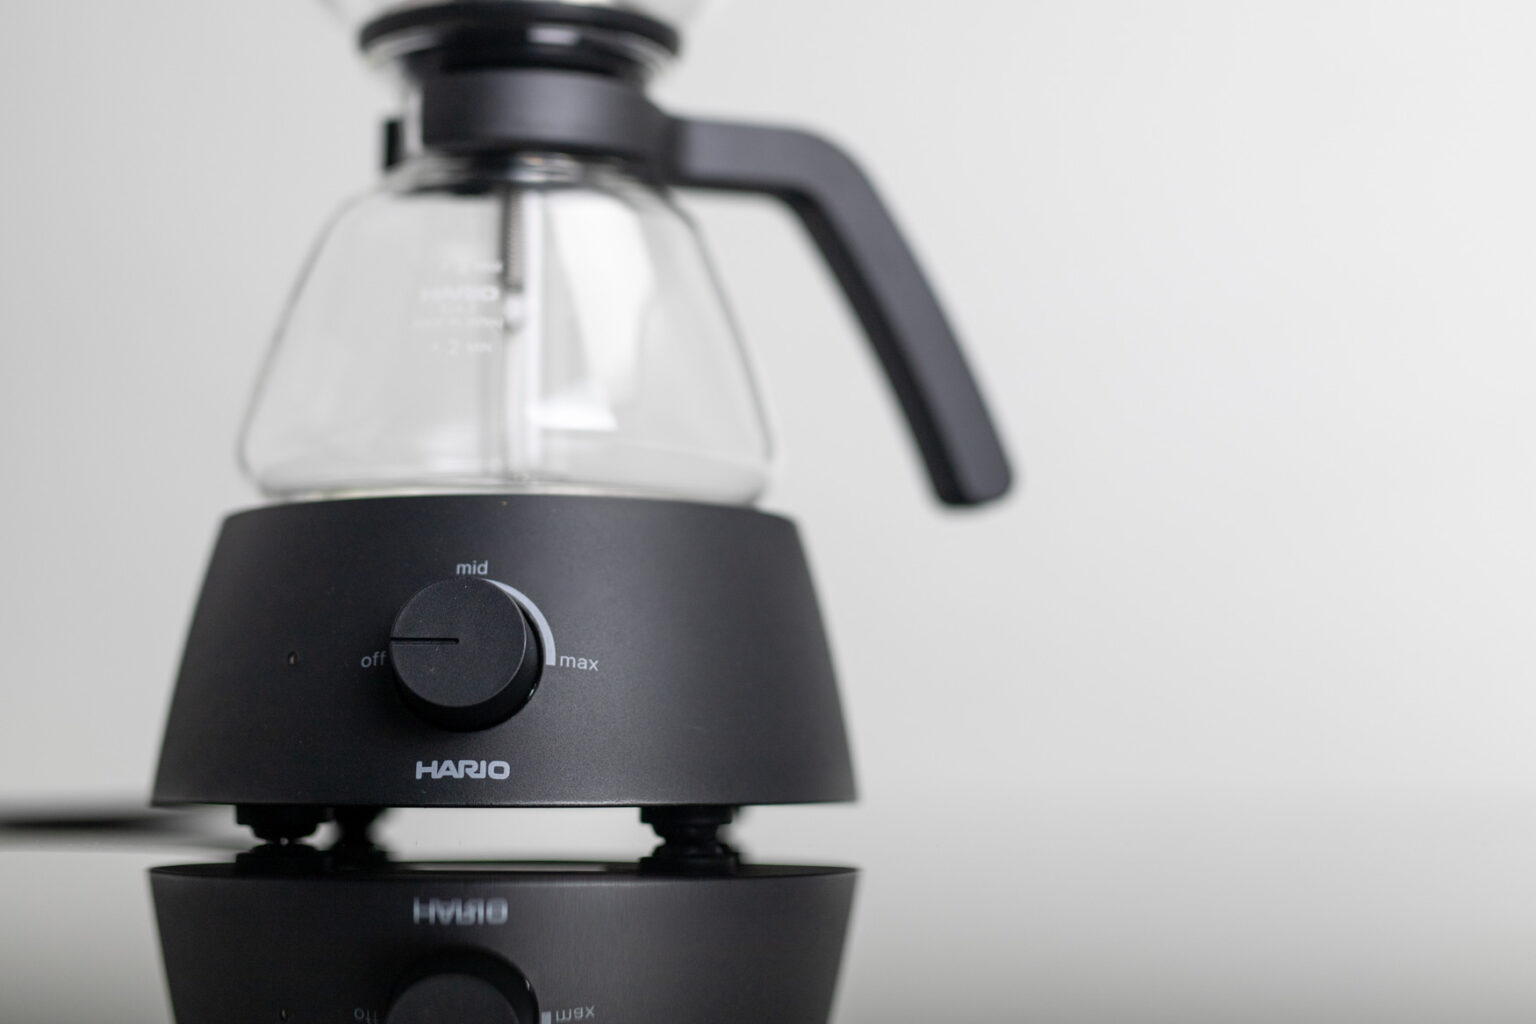 The Hario ECS has a nice silhouette and the heating plate has a nice low profile.